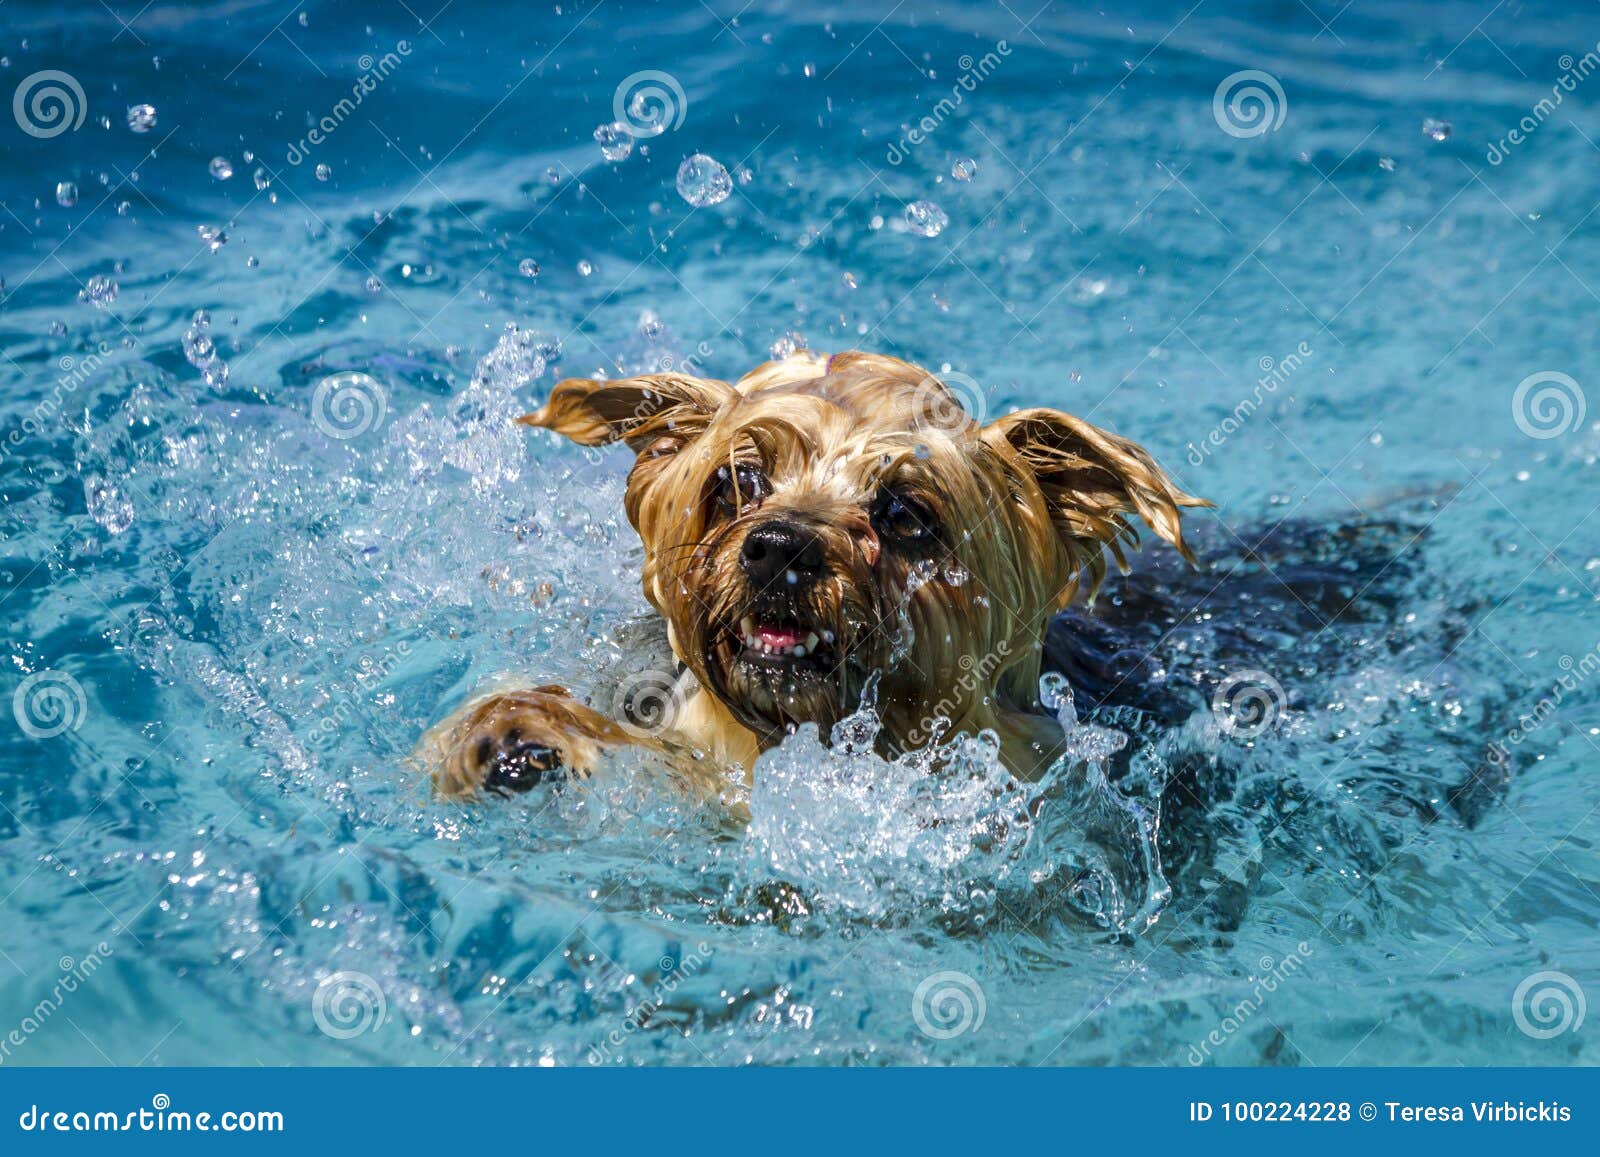 Dogs Playing in Swimming Pool Stock Photo - Image of fetch, outdoors